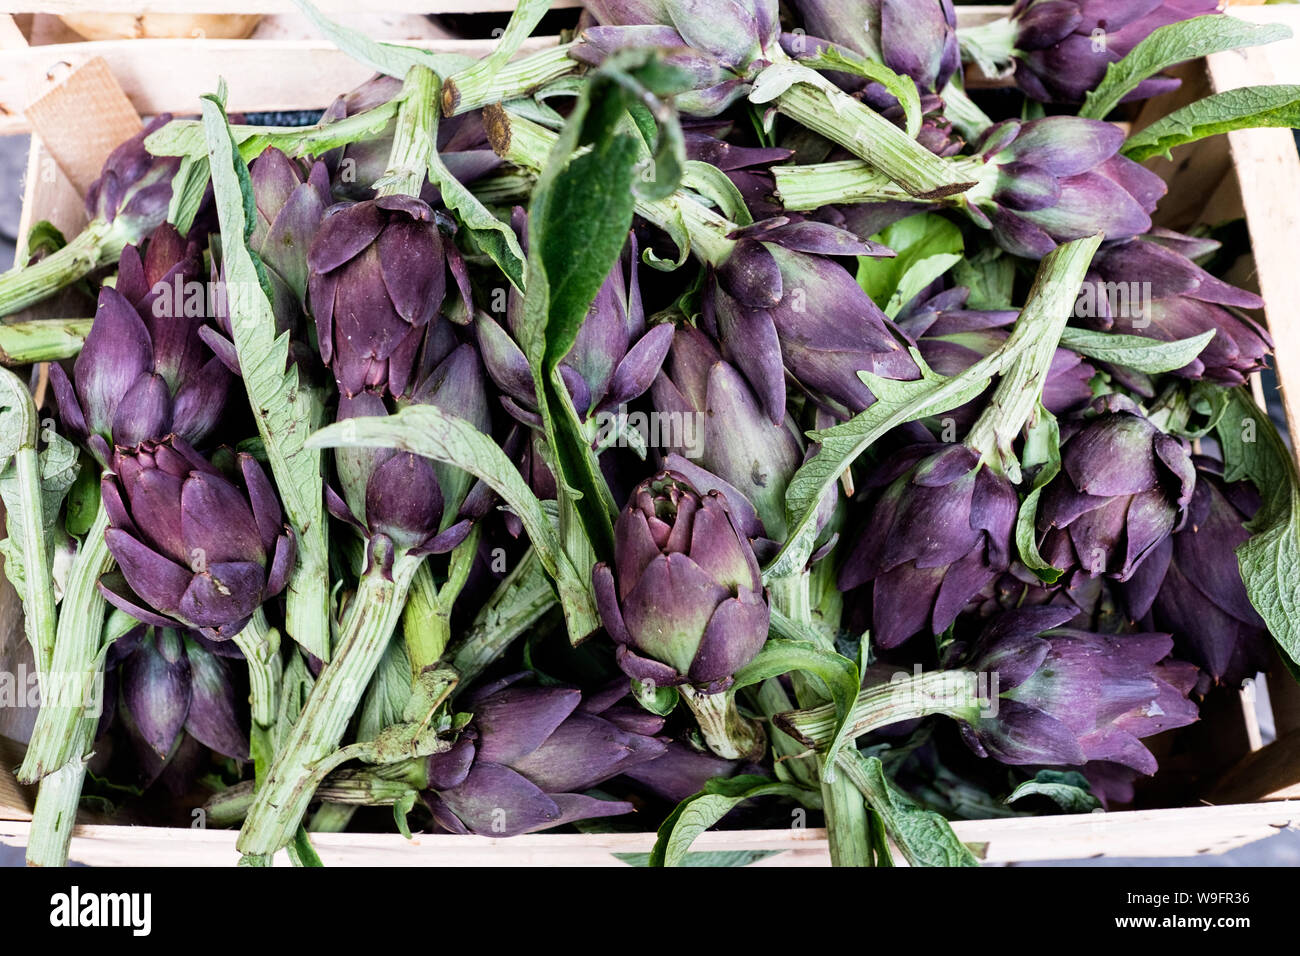 Purple artichokes for sale at a farmer's market in Florence, Italy. Stock Photo